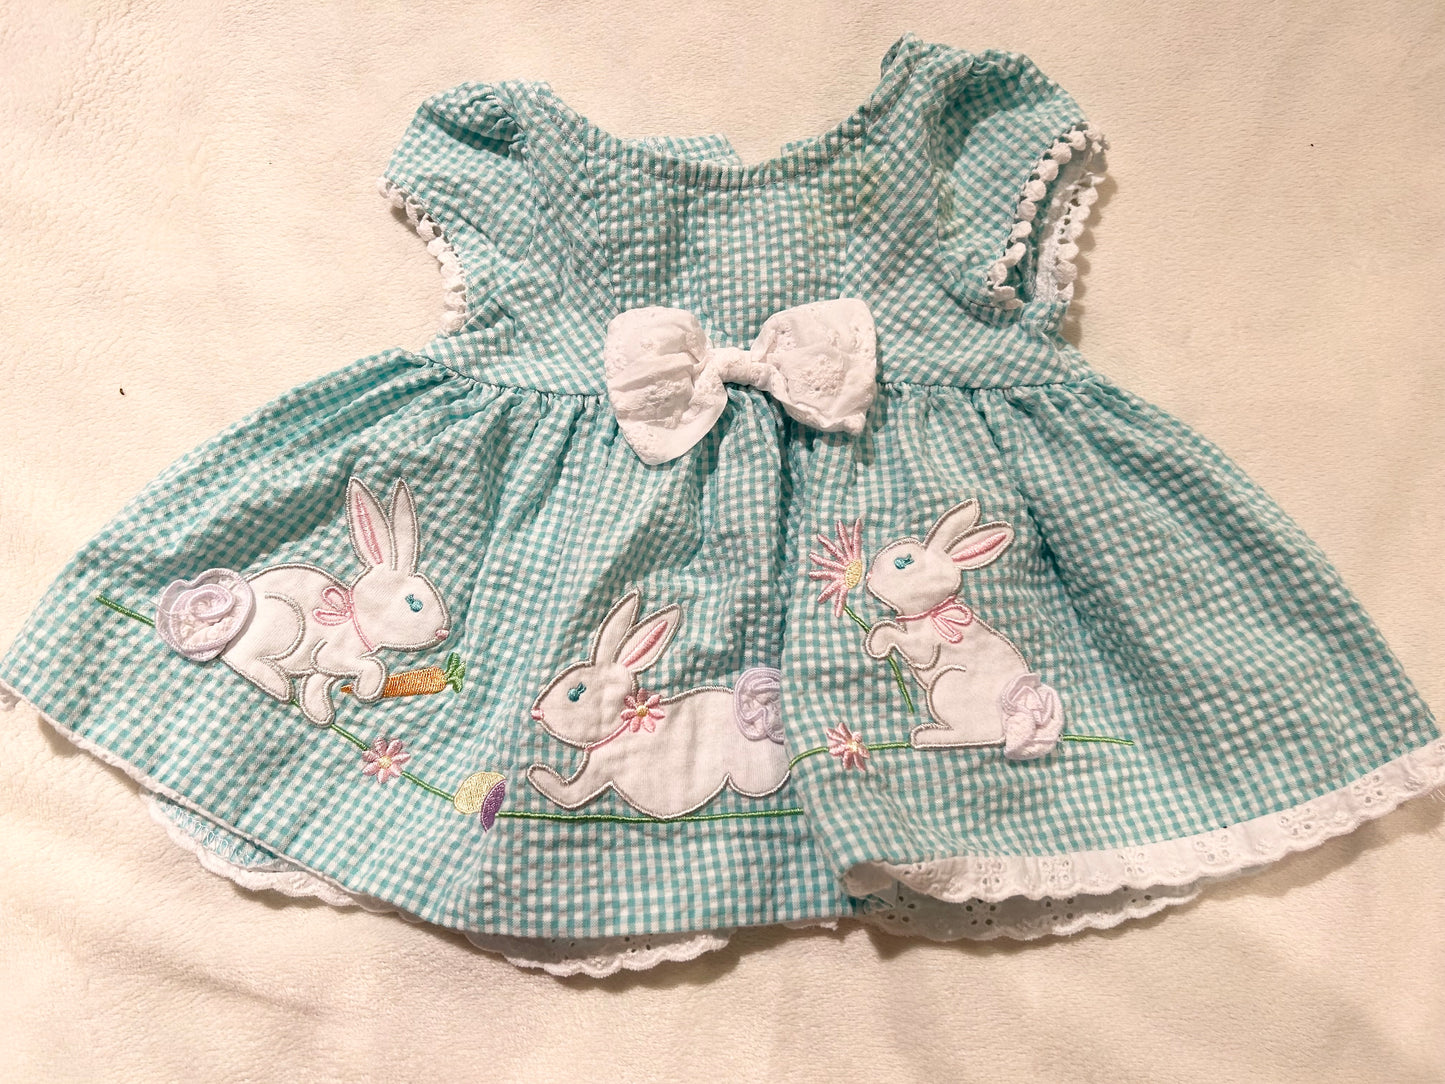 Good lad 3-6 month girl Seersucker dress with bunnies and matching bloomers